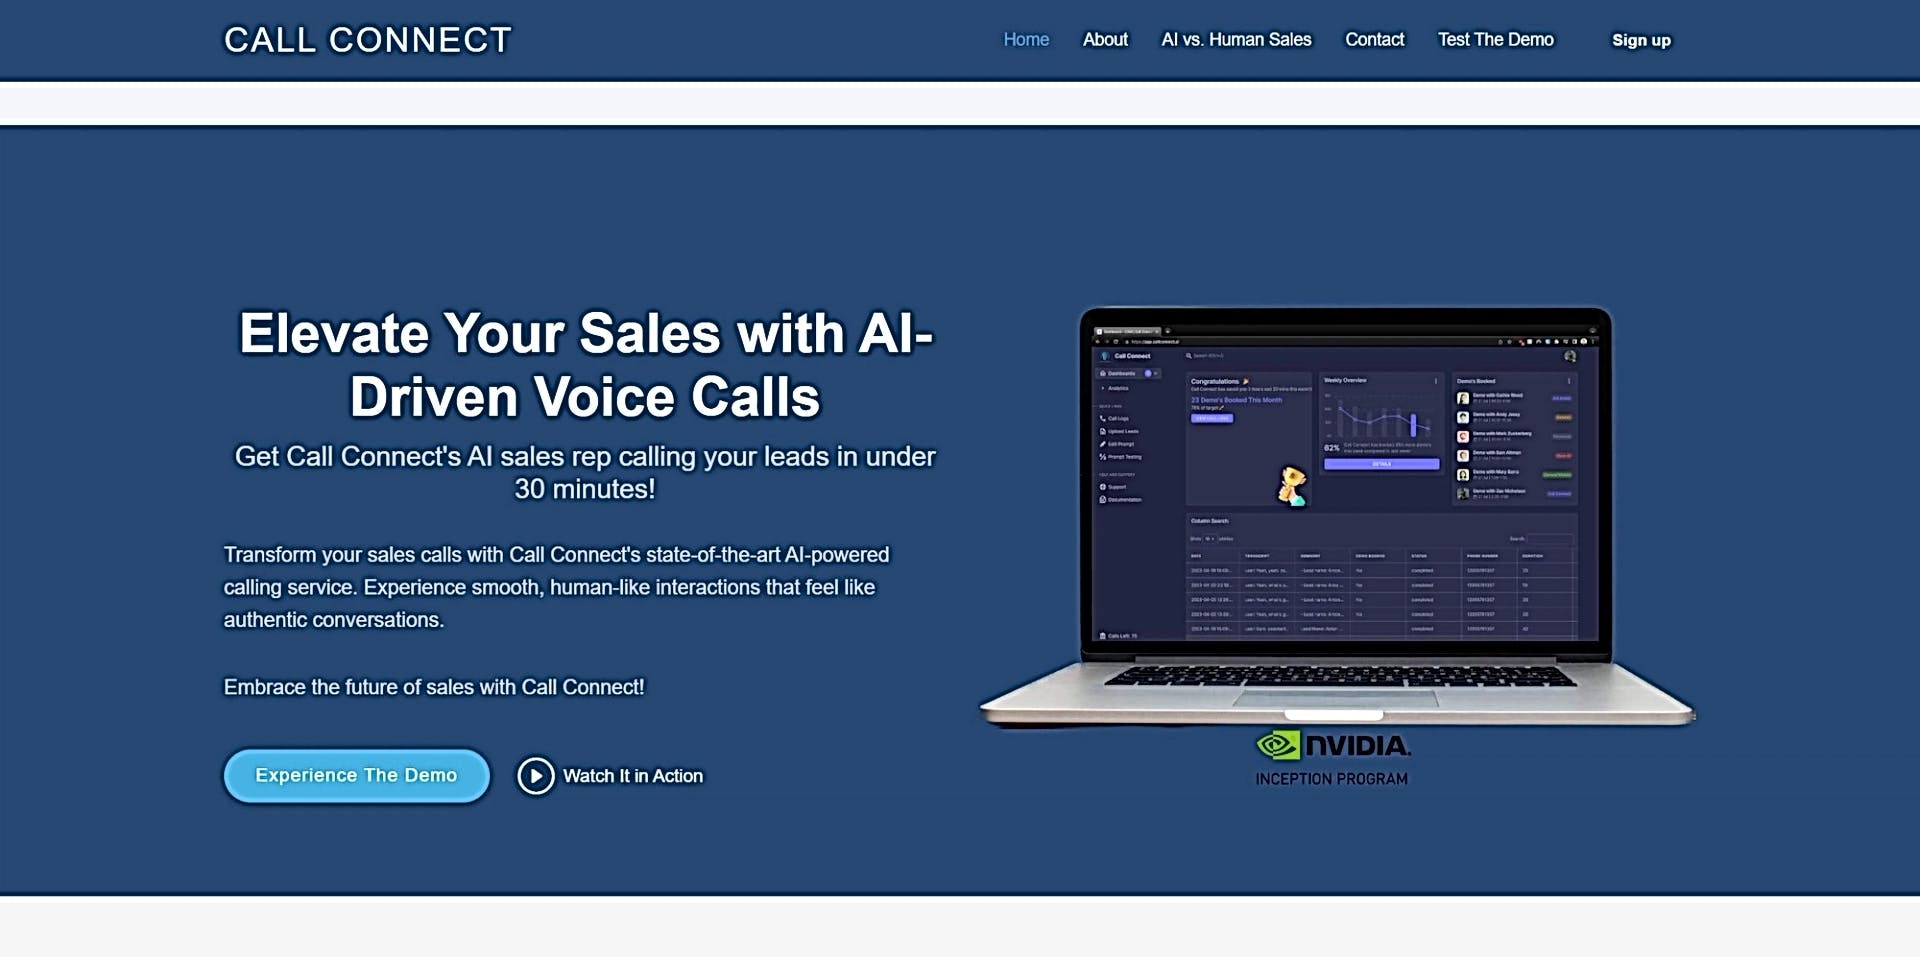 Call Connect featured